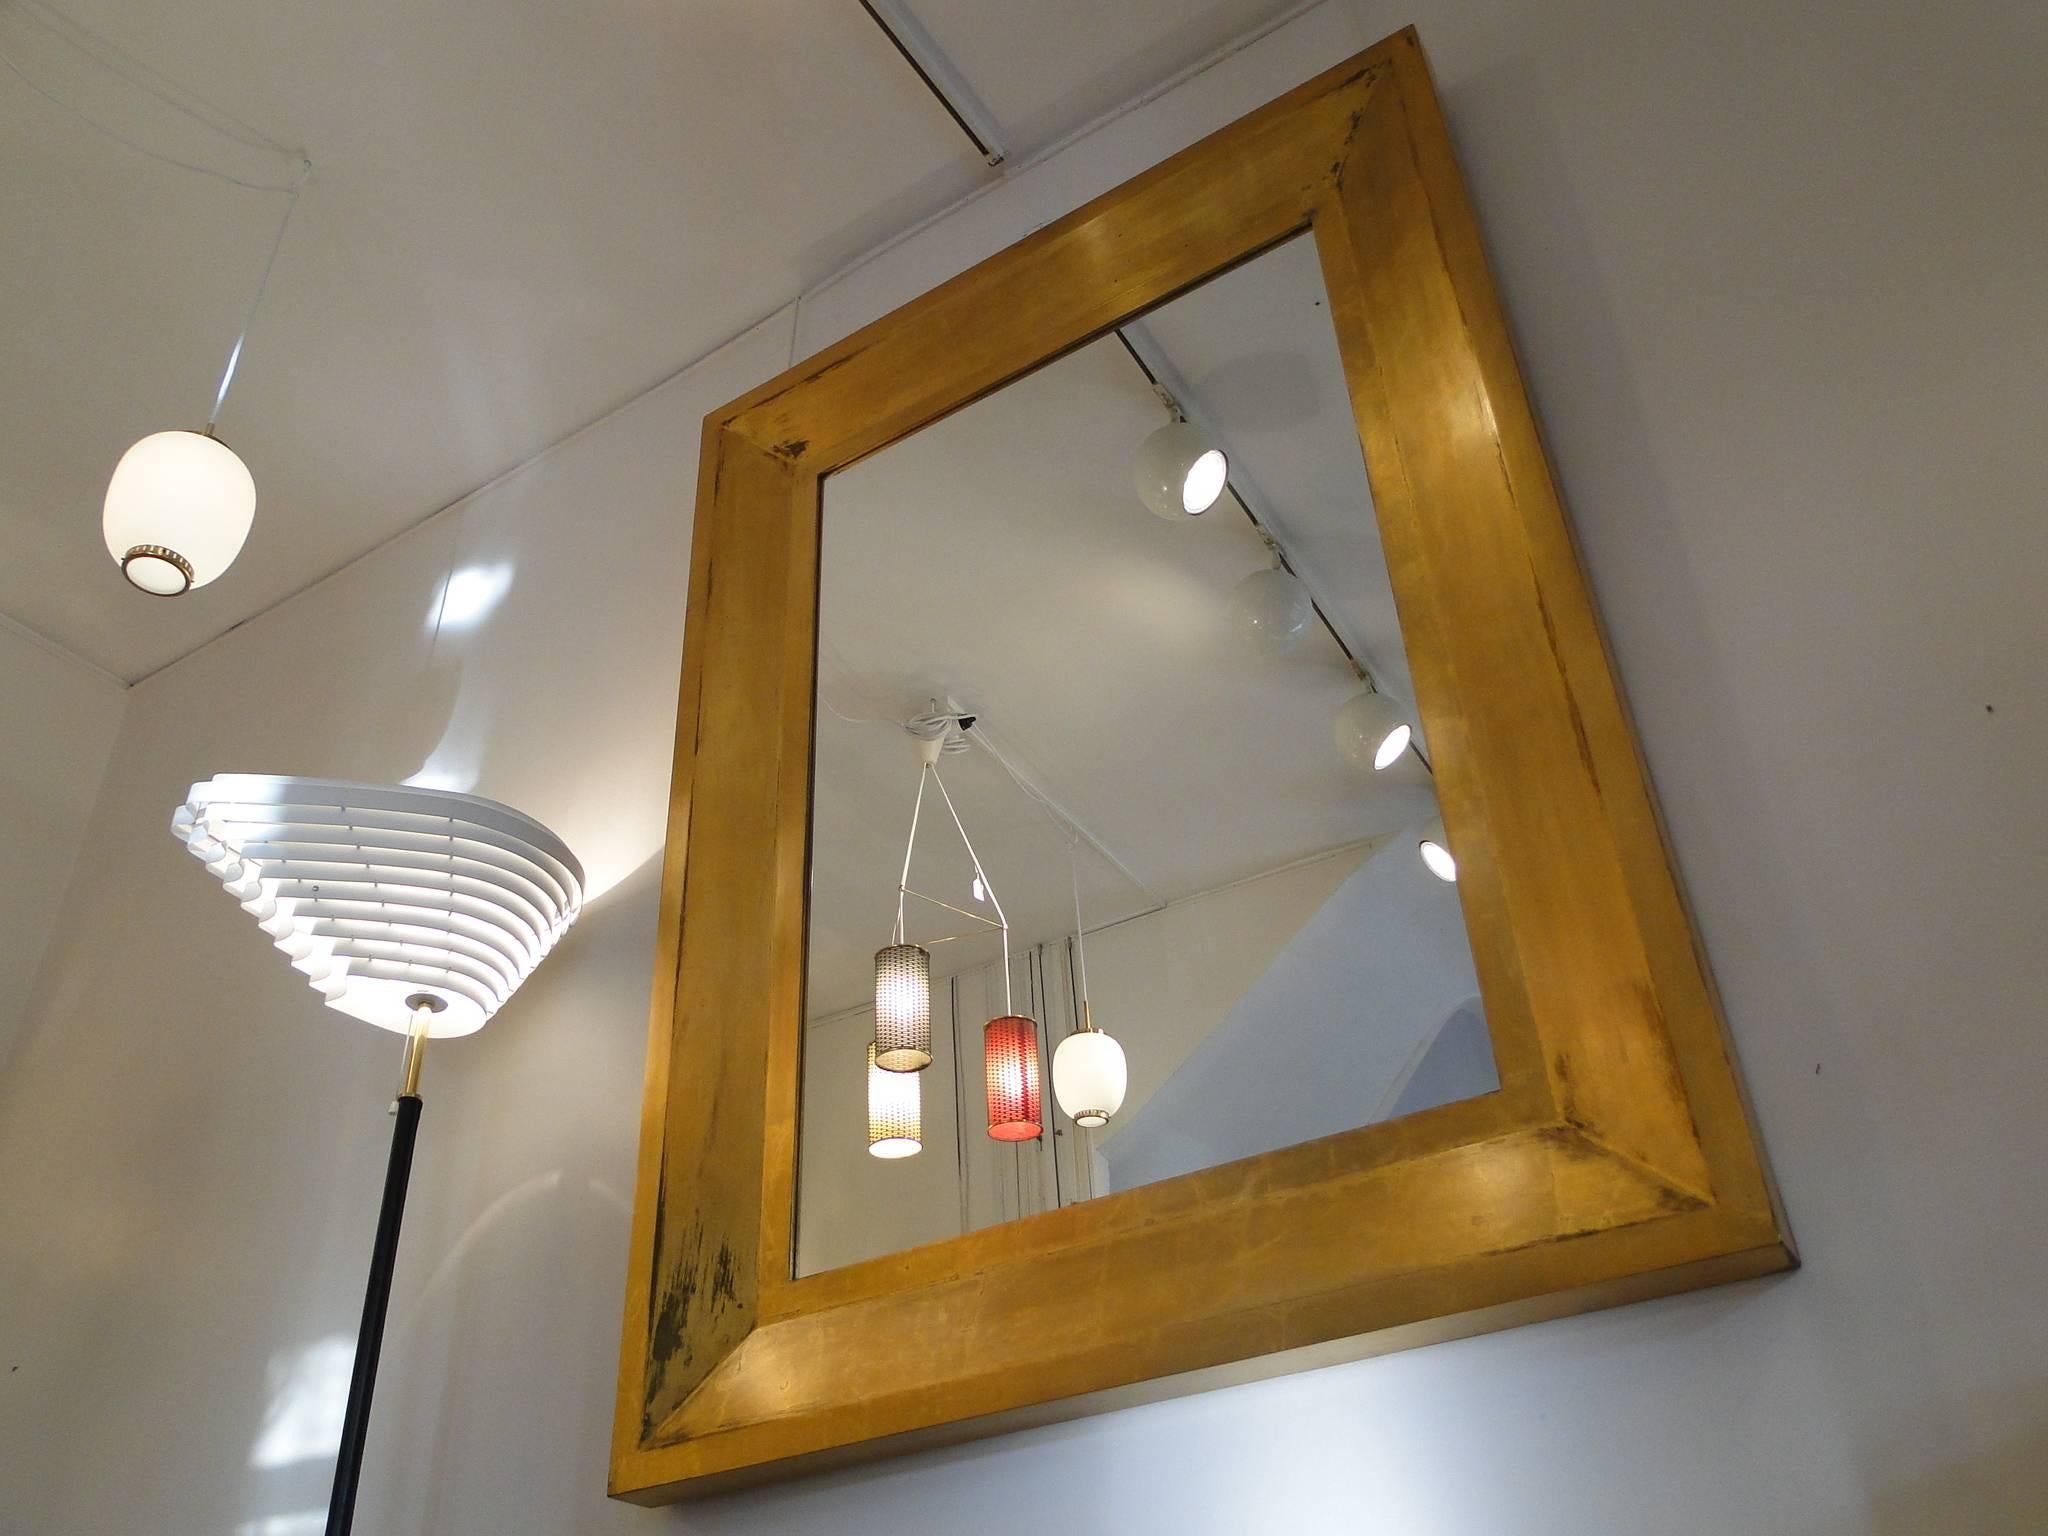 Rectangular wall-hanging mirror with frame in gold leaf, 1980s. This mirror can hang vertically or horizontally.